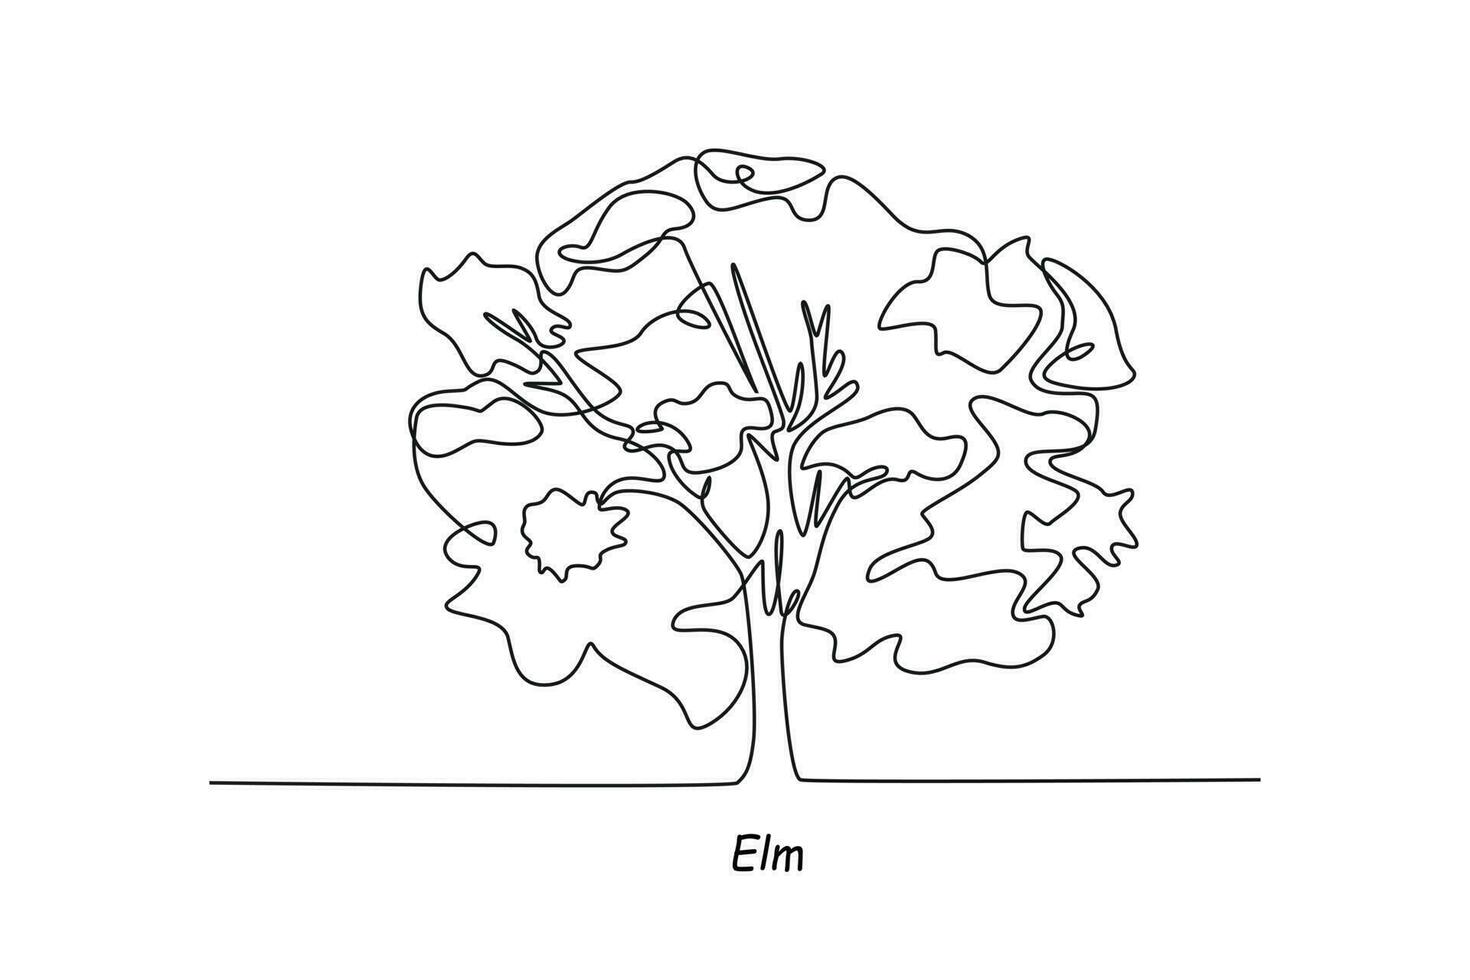 Single one line drawing elm. Tree concept. Continuous line draw design graphic vector illustration.